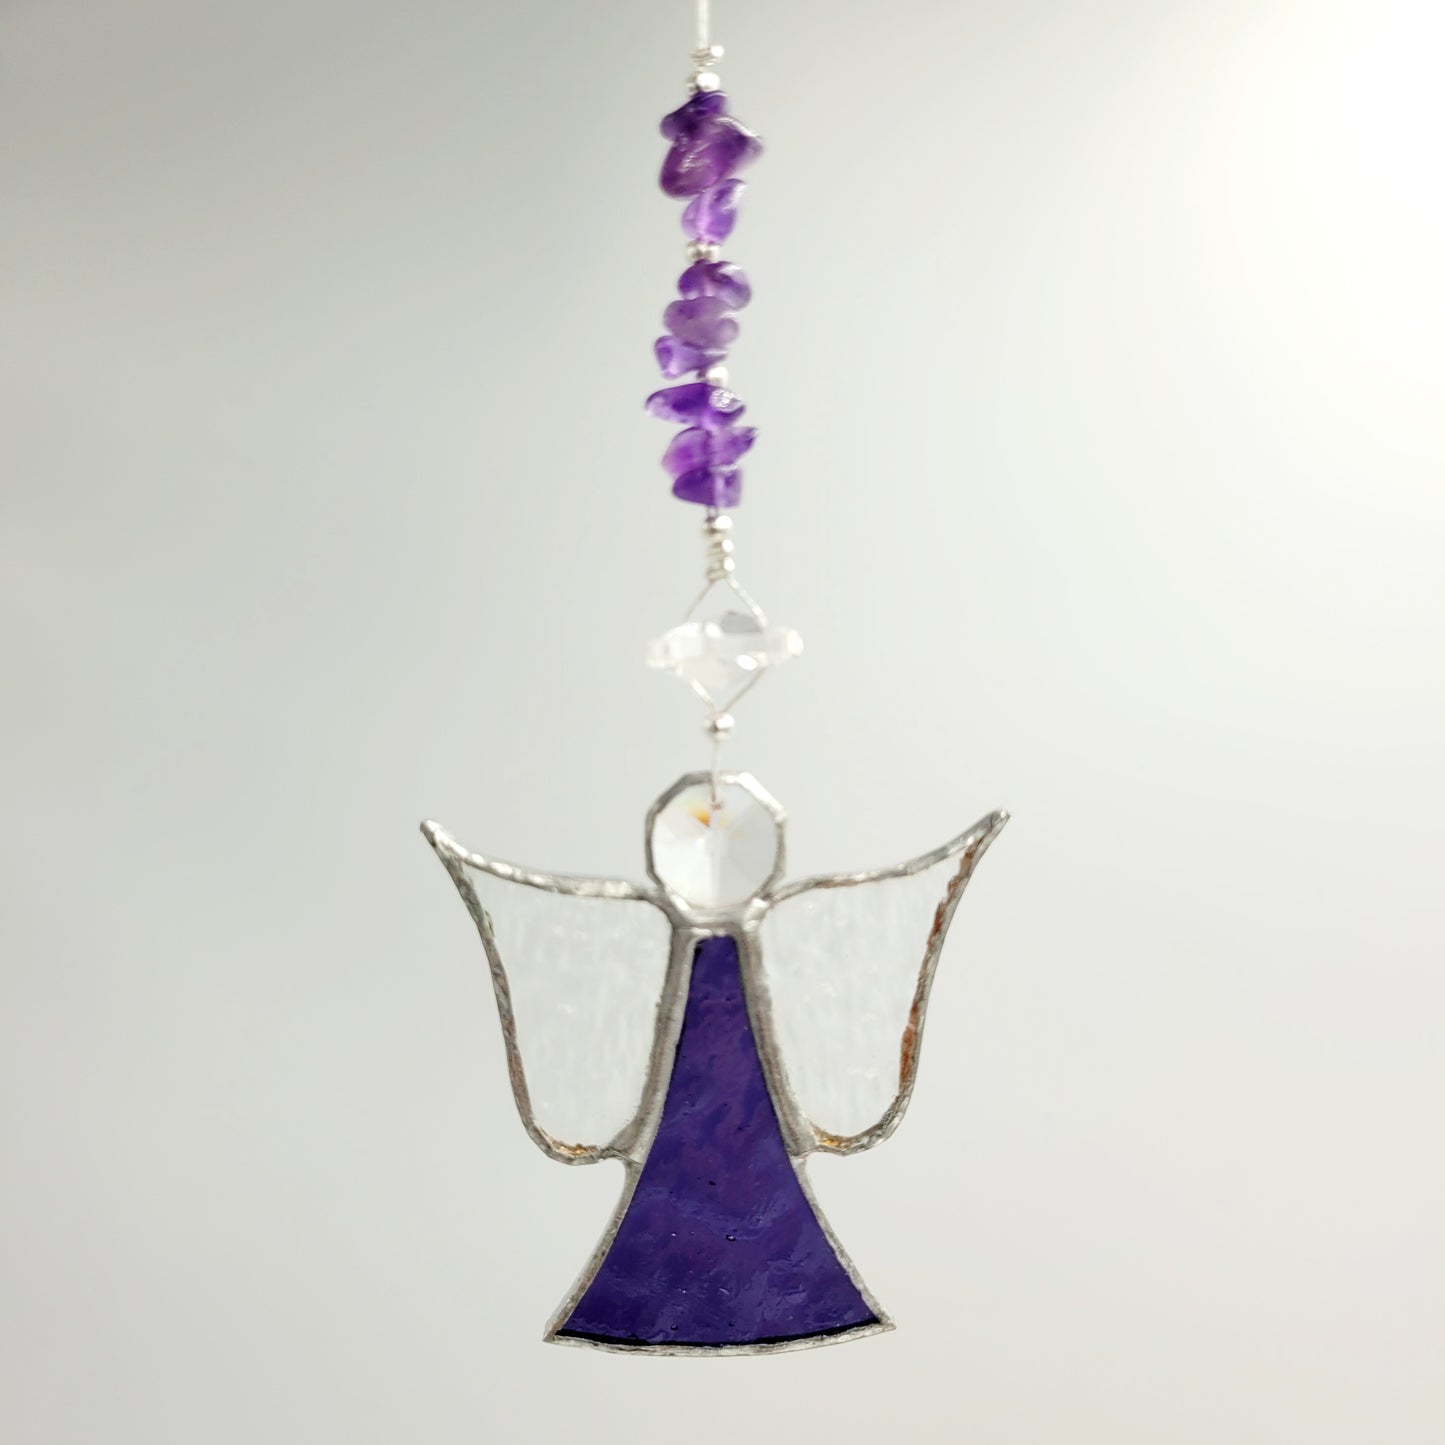 Hanging Angel Stained Glass Purple/ Amethyst